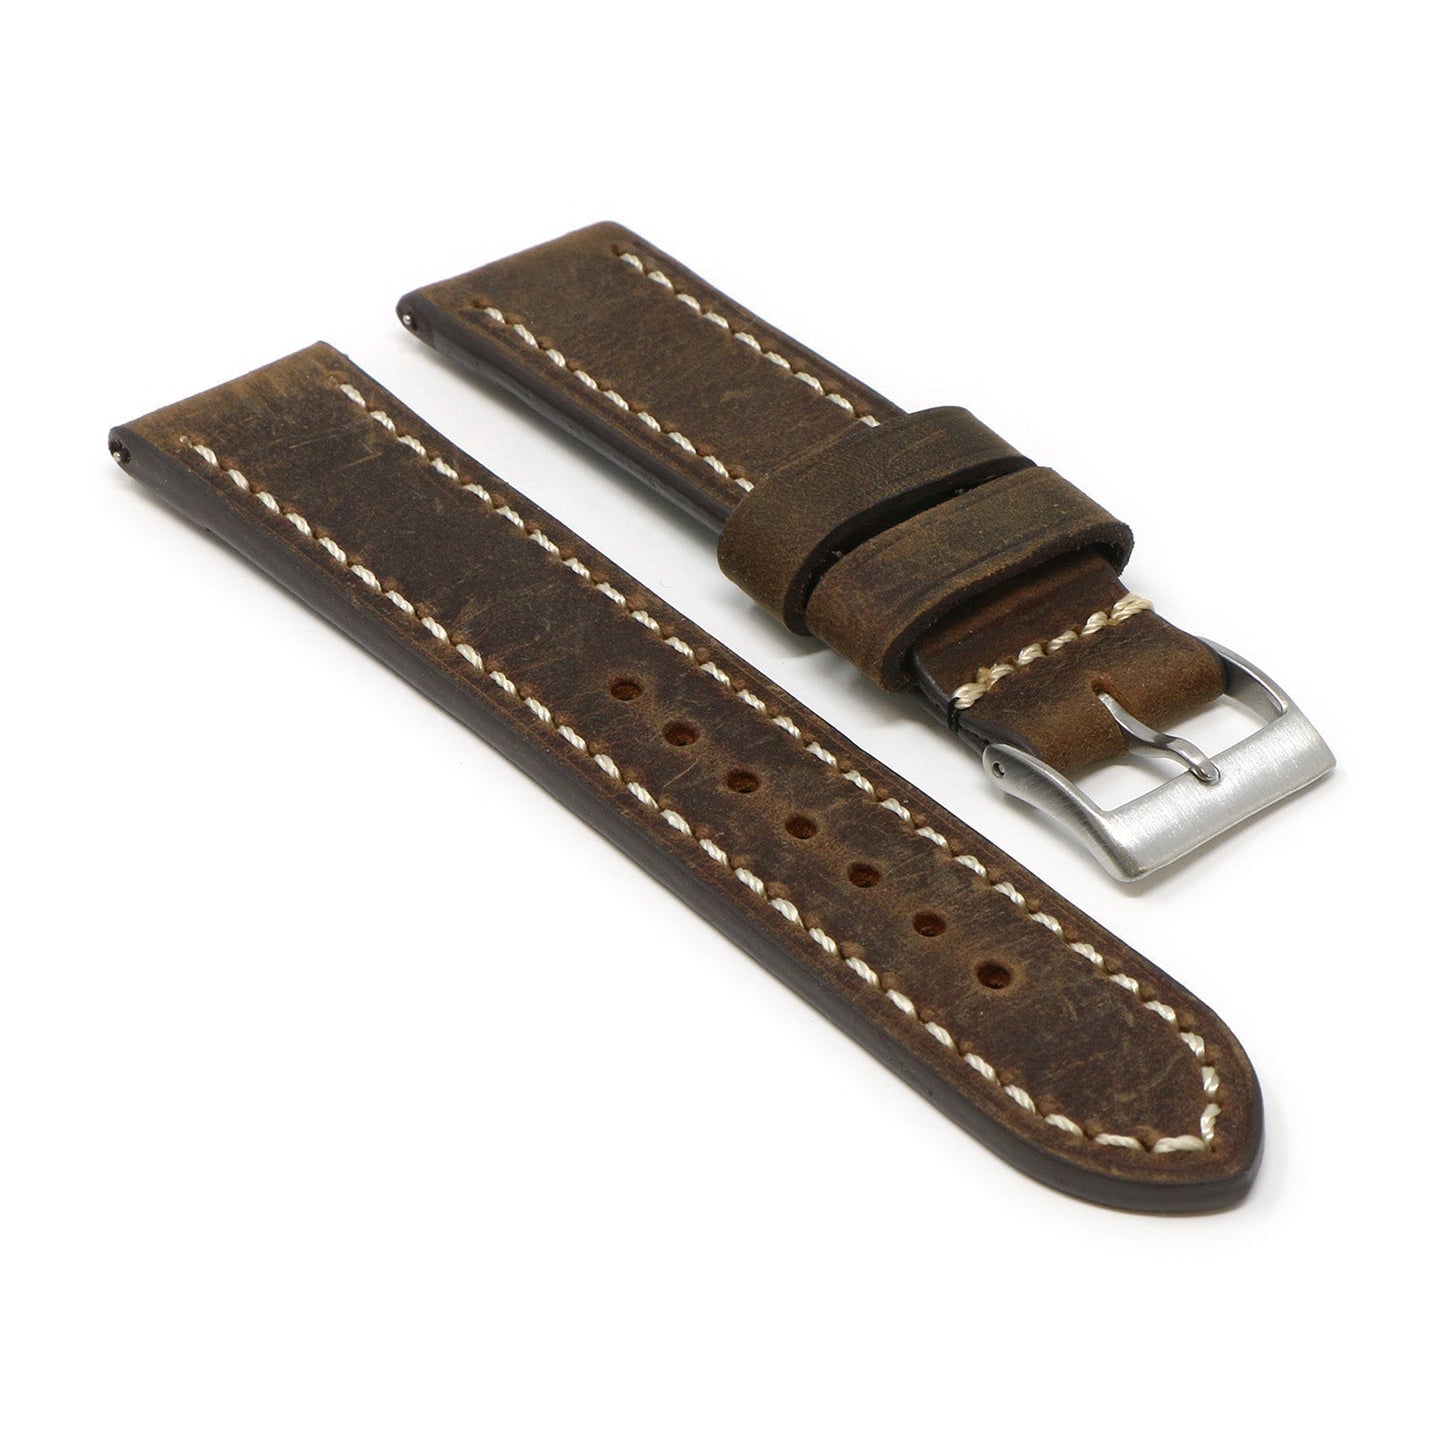 21mm Black Classic Vintage Leather Watch Band